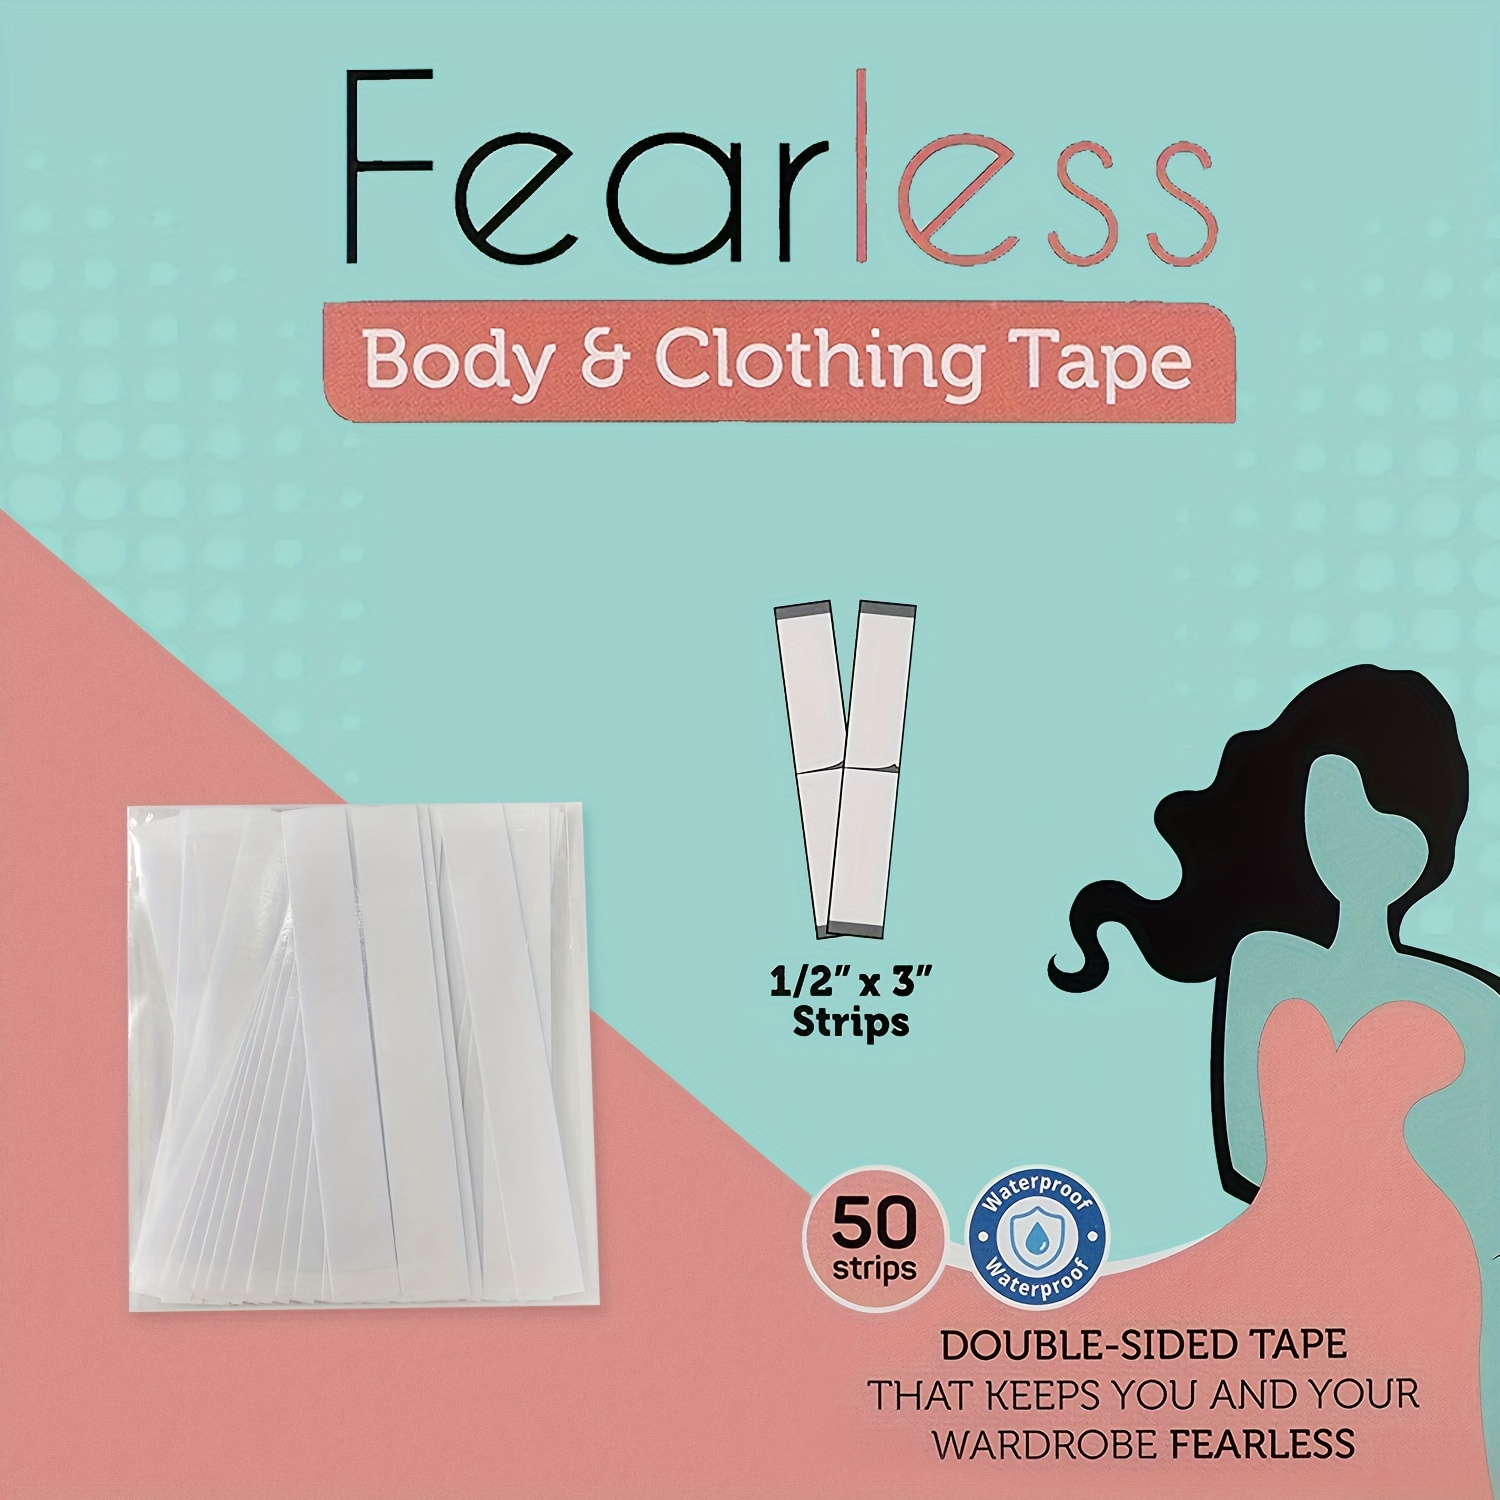 Fearless Body and Clothing Tape Double-sided Waterproof Fashion